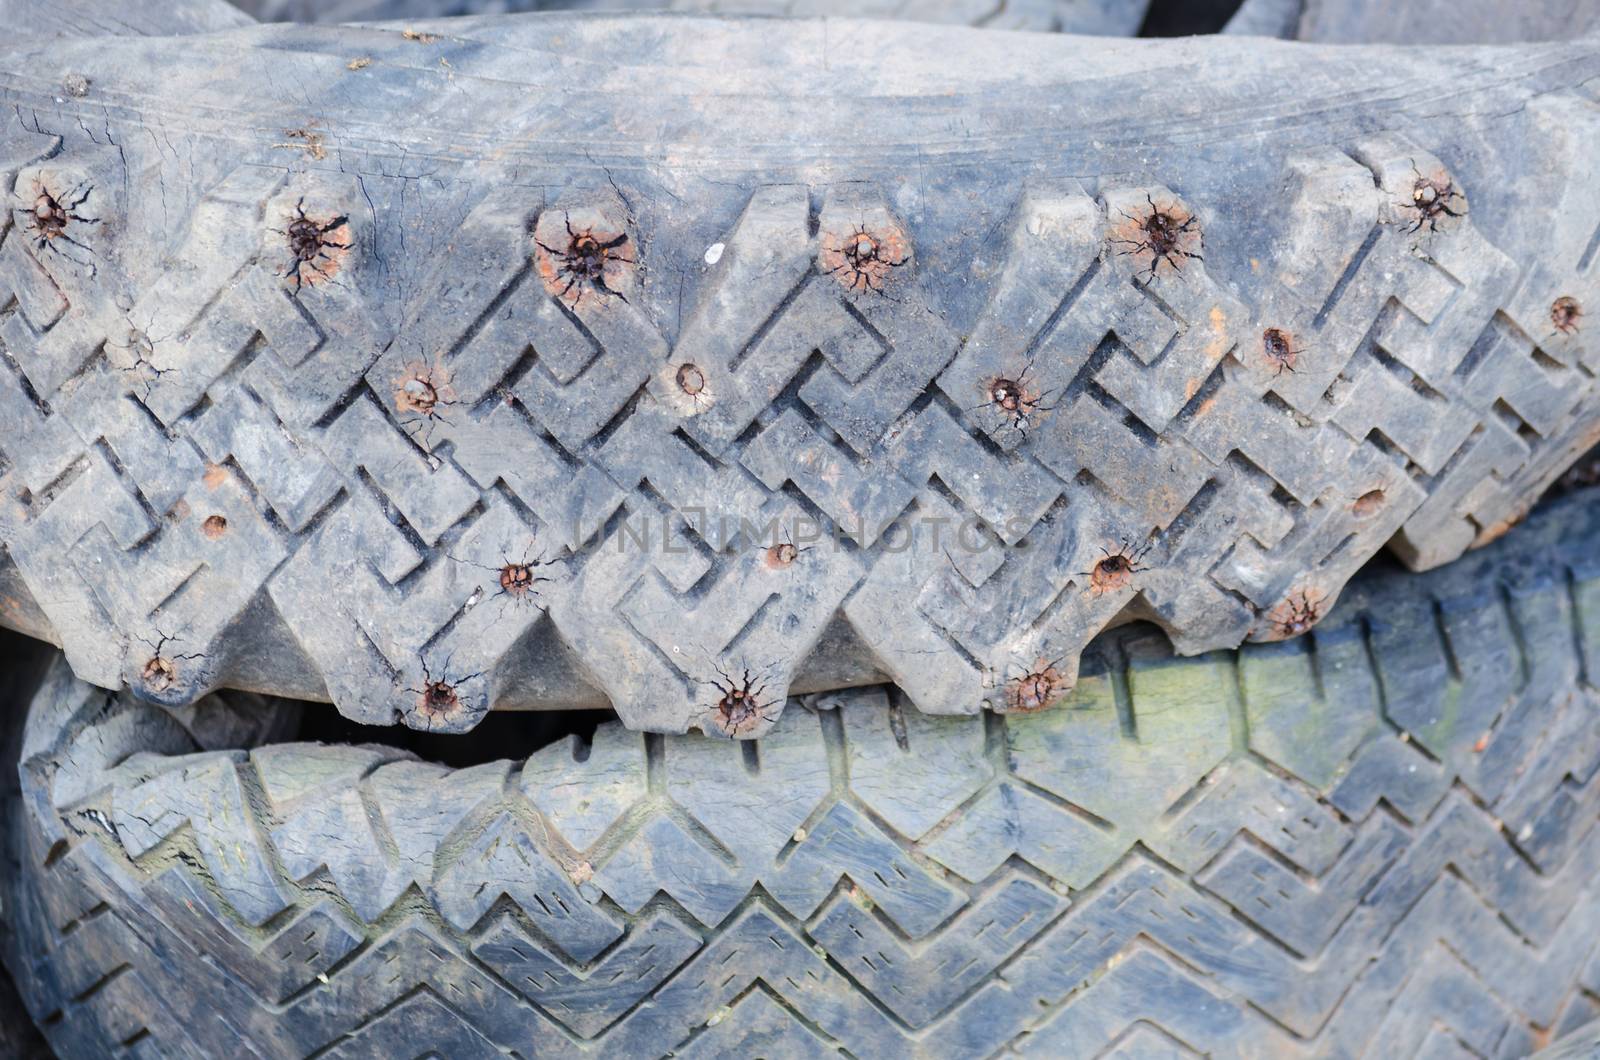 A stack of old studded tires. The use of studded tires is not allowed in Germany.